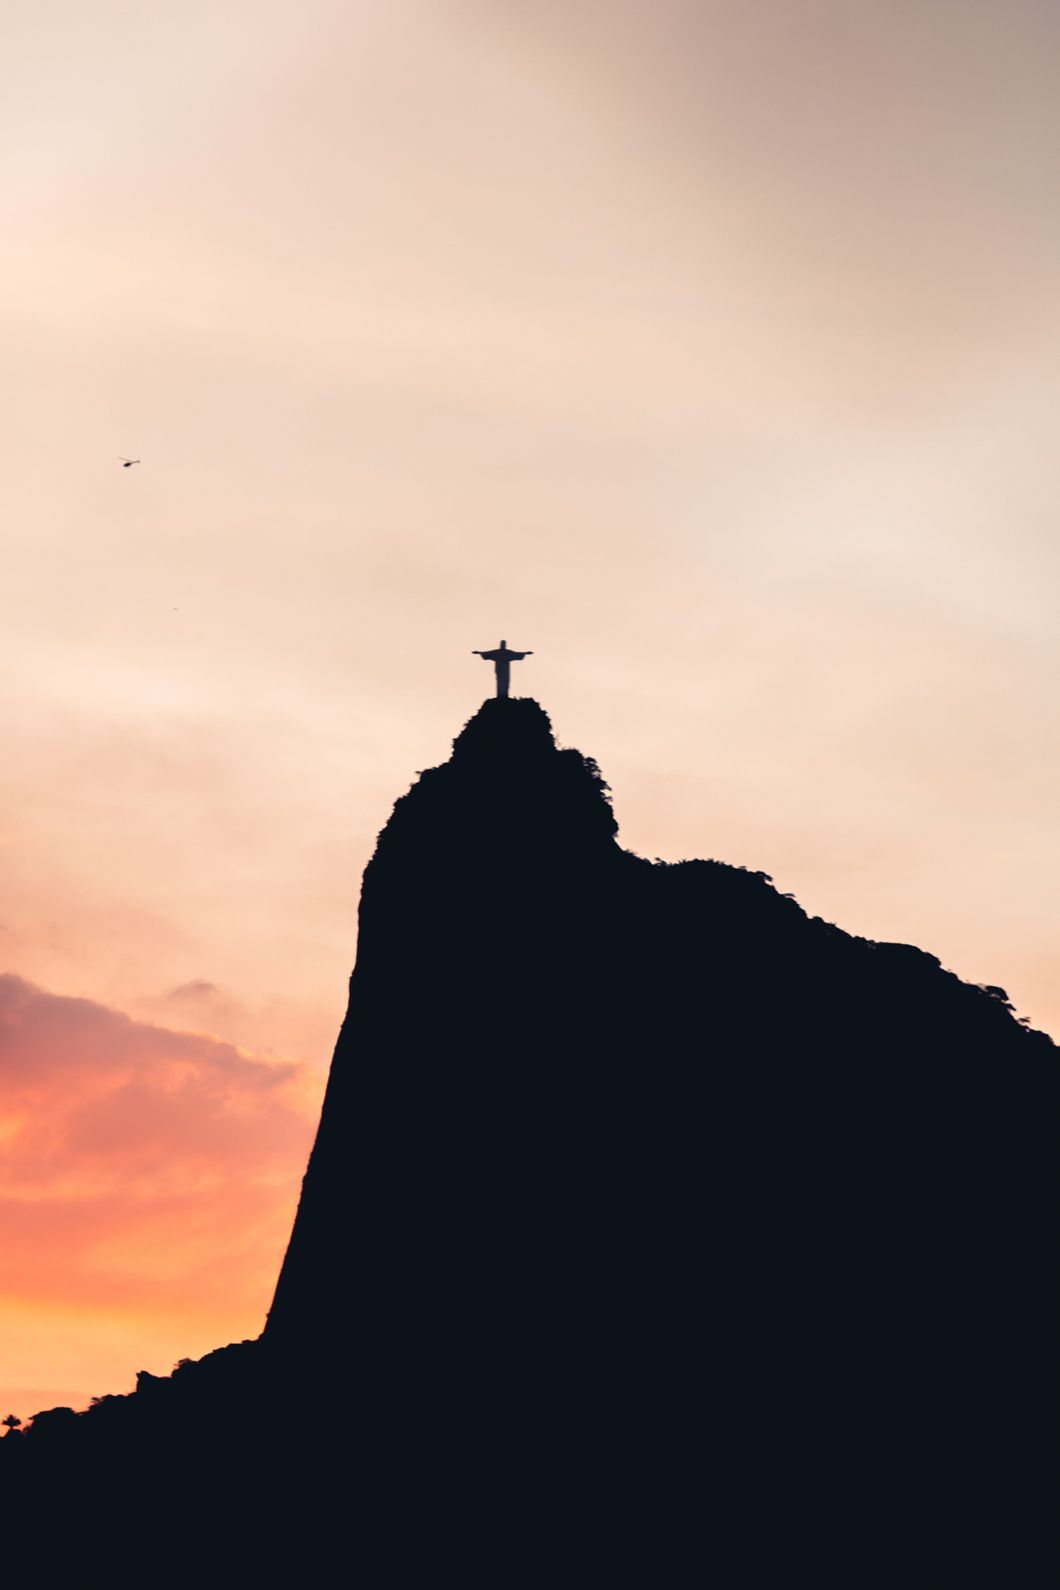 https://www.pexels.com/photo/black-and-white-silhouette-of-christ-the-redeemer-1804177/